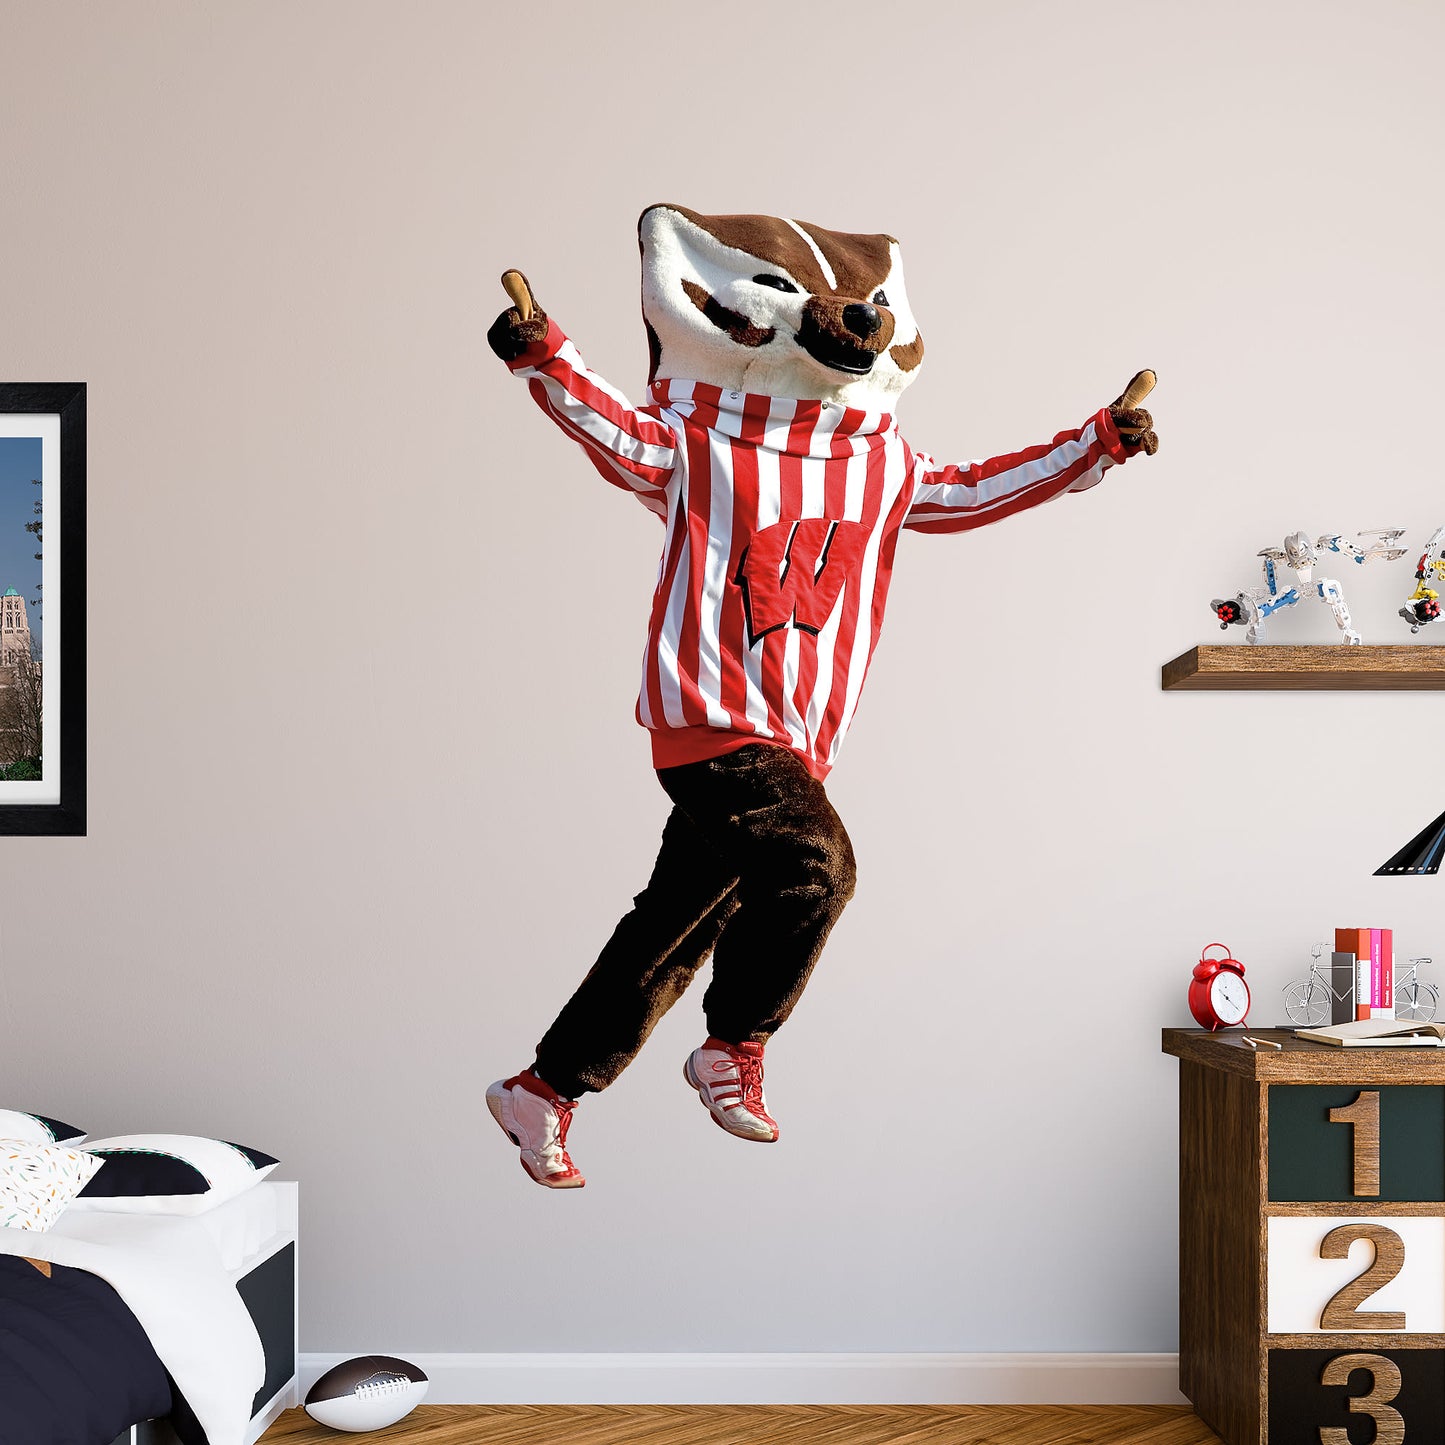 Wisconsin Badgers: Bucky Badger Mascot - Officially Licensed Removable Wall Decal